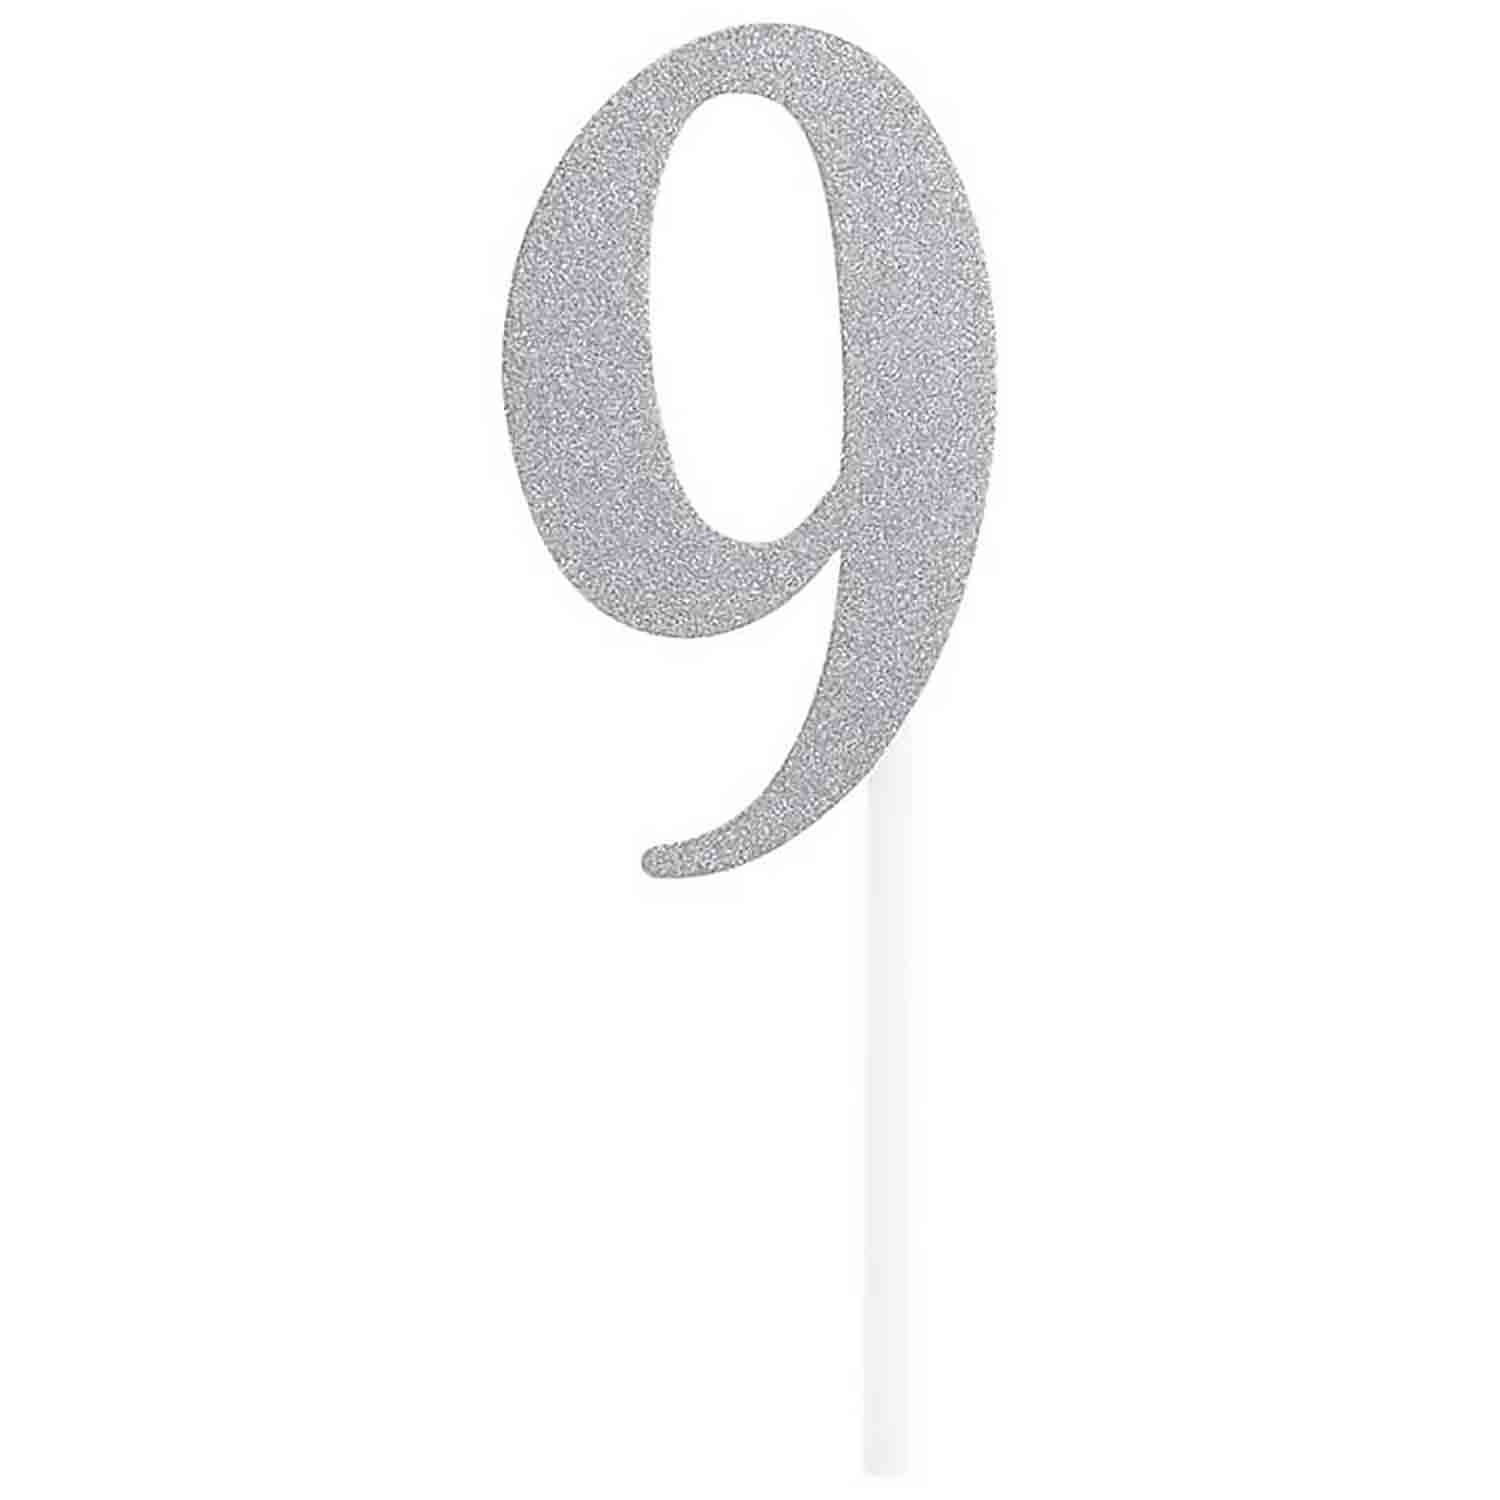 Number 9 Silver Cake Topper